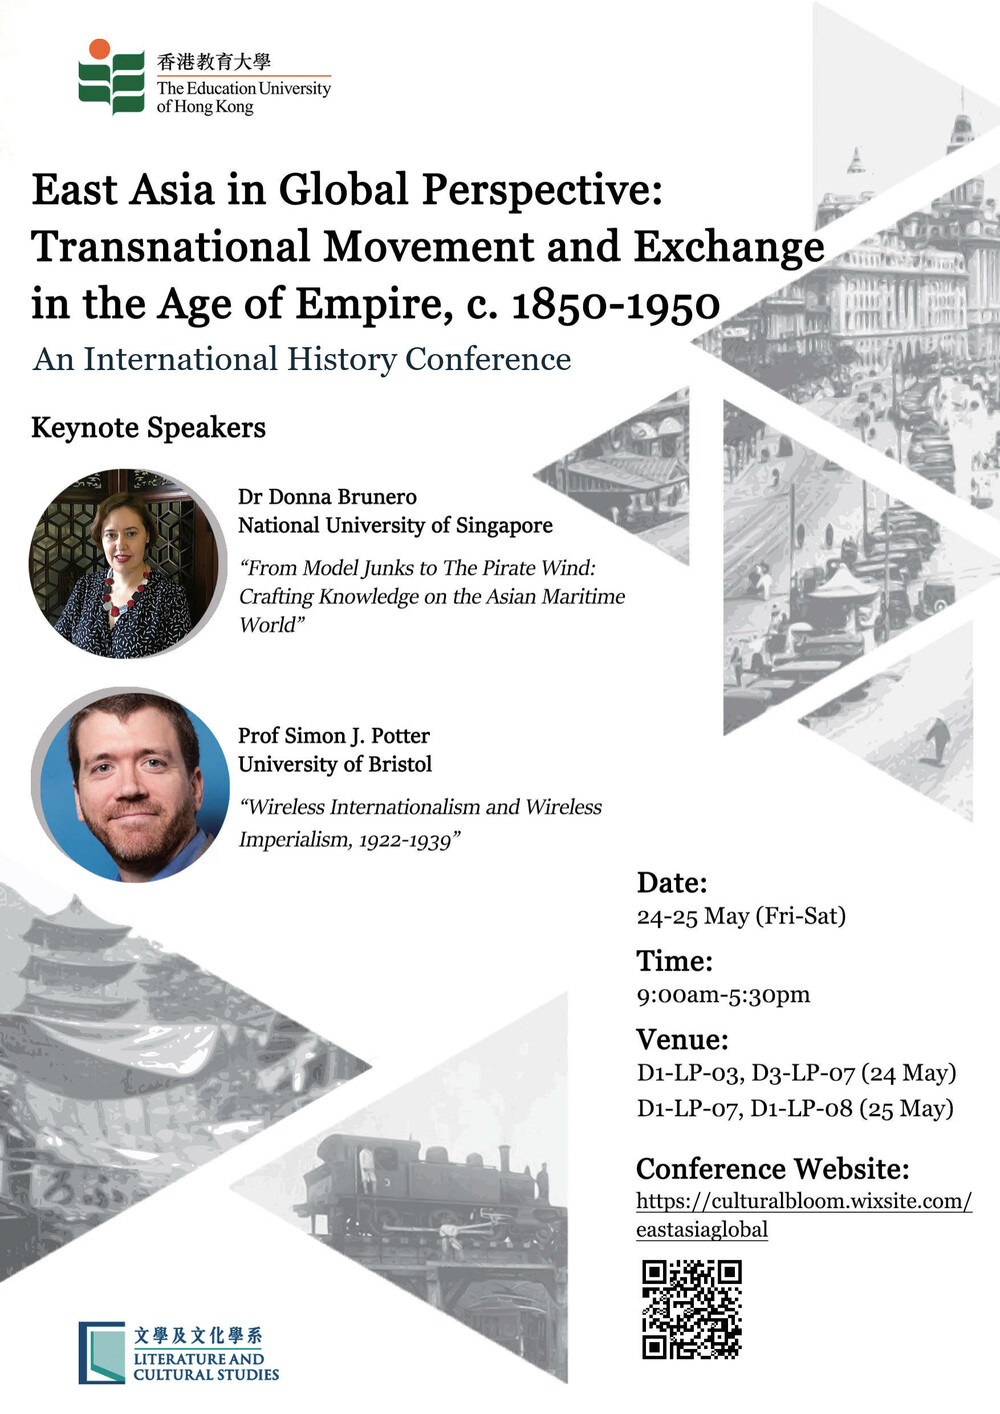 An International History Conference "East Asia in Global Perspective: Transnational Movement and Exchange in the Age of Empire, c. 1850-1950"